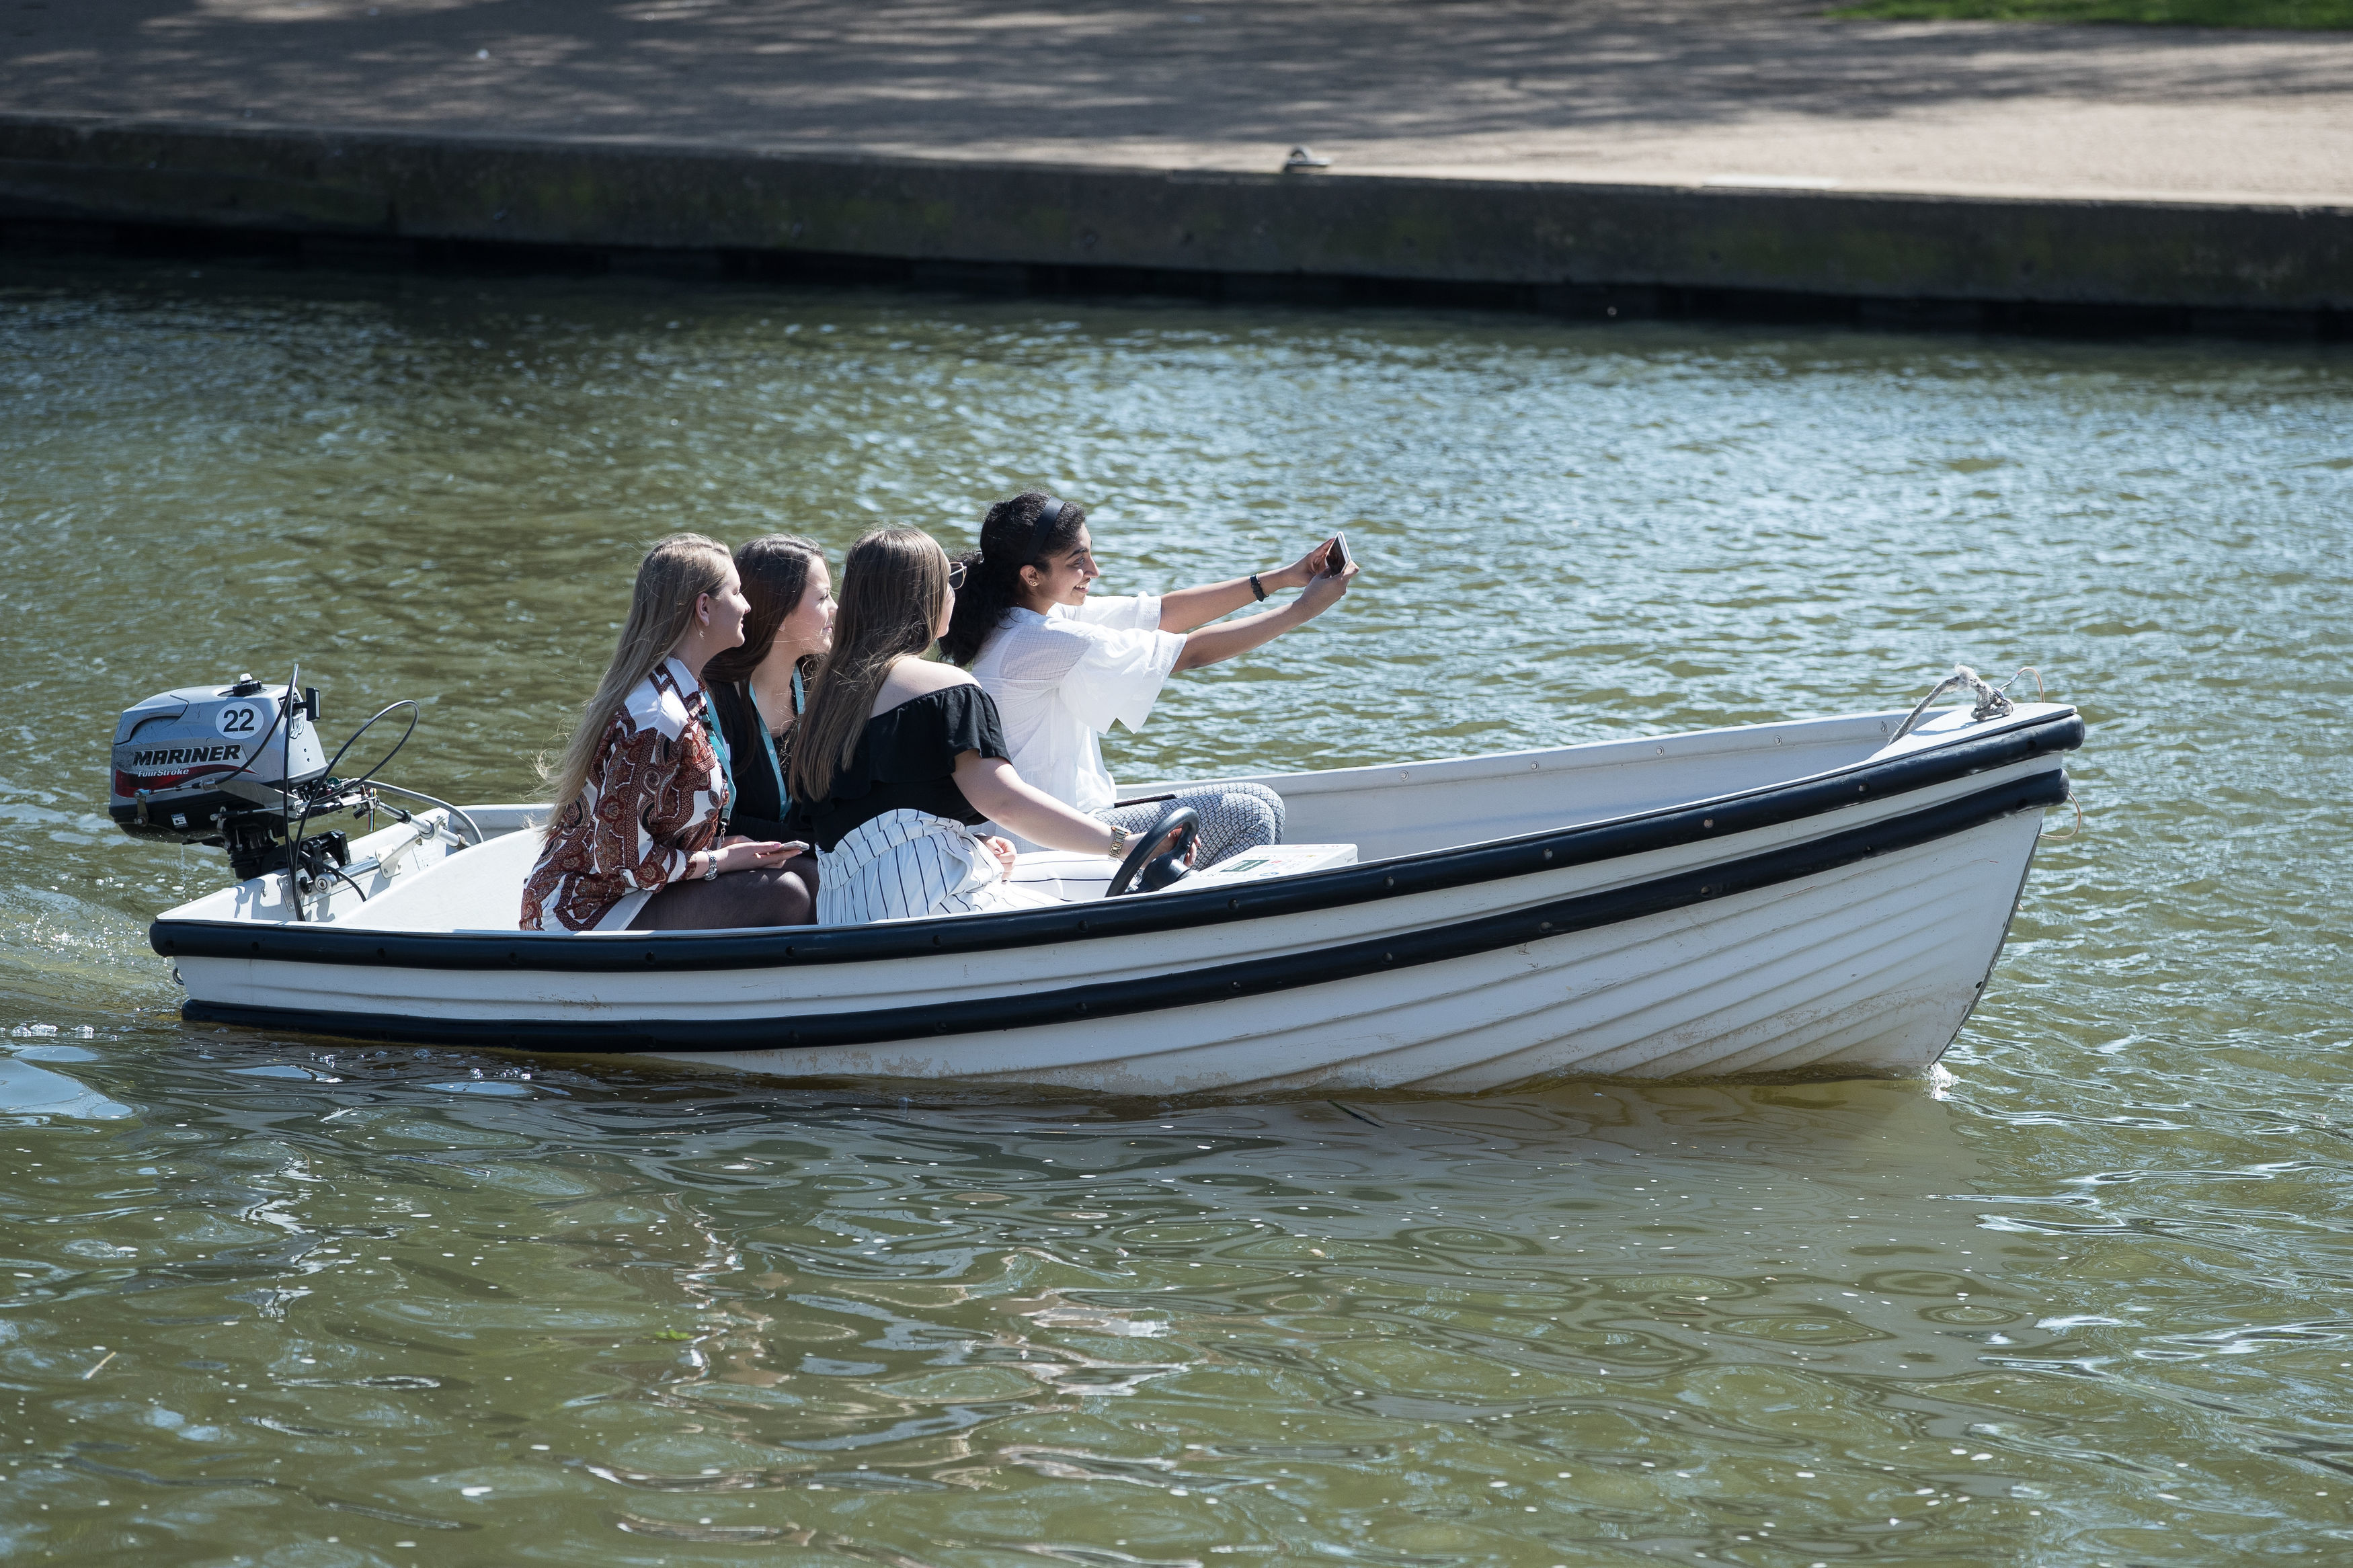 A group of girls take a selfie on a hire boat  in Stratford-upon-Avon (Aaron Chown/PA)